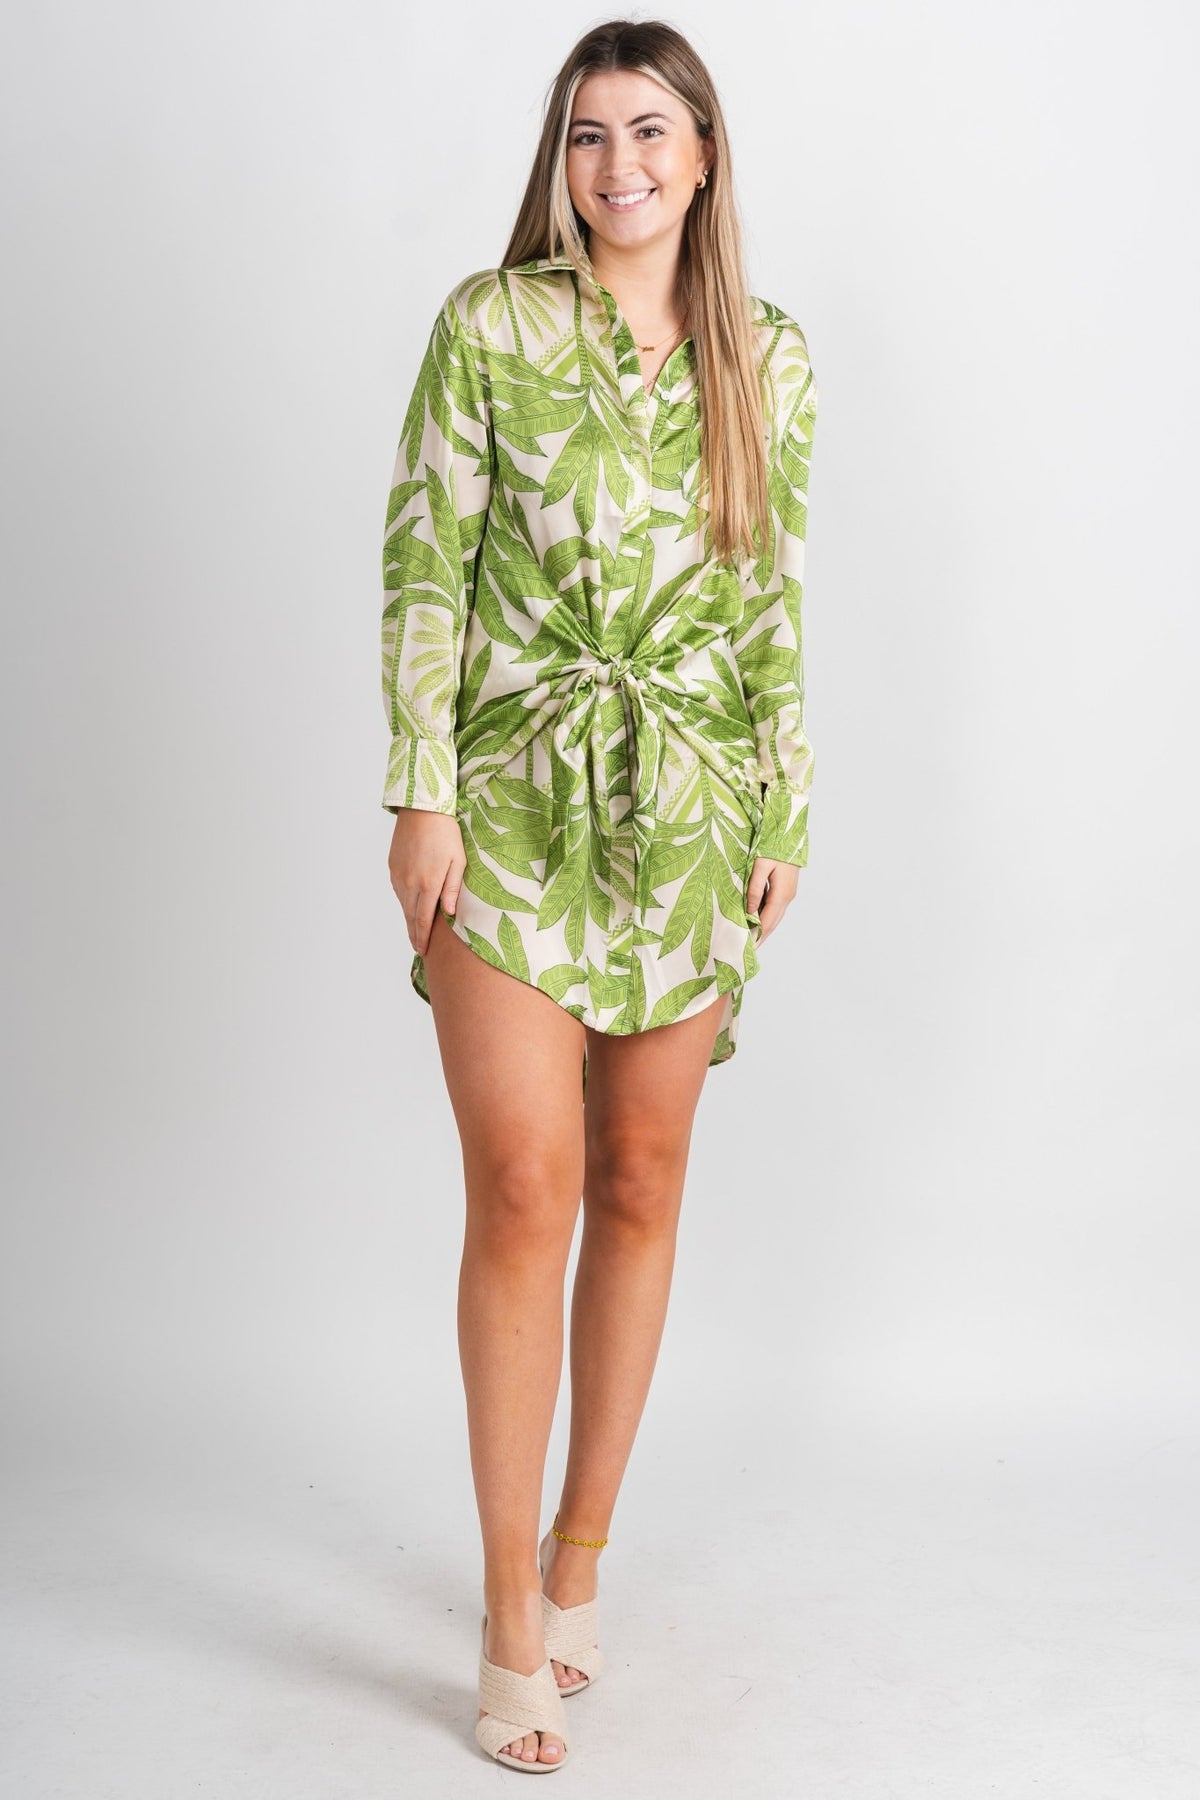 Tropical leaf tie waist dress green - Trendy dress - Cute Vacation Collection at Lush Fashion Lounge Boutique in Oklahoma City